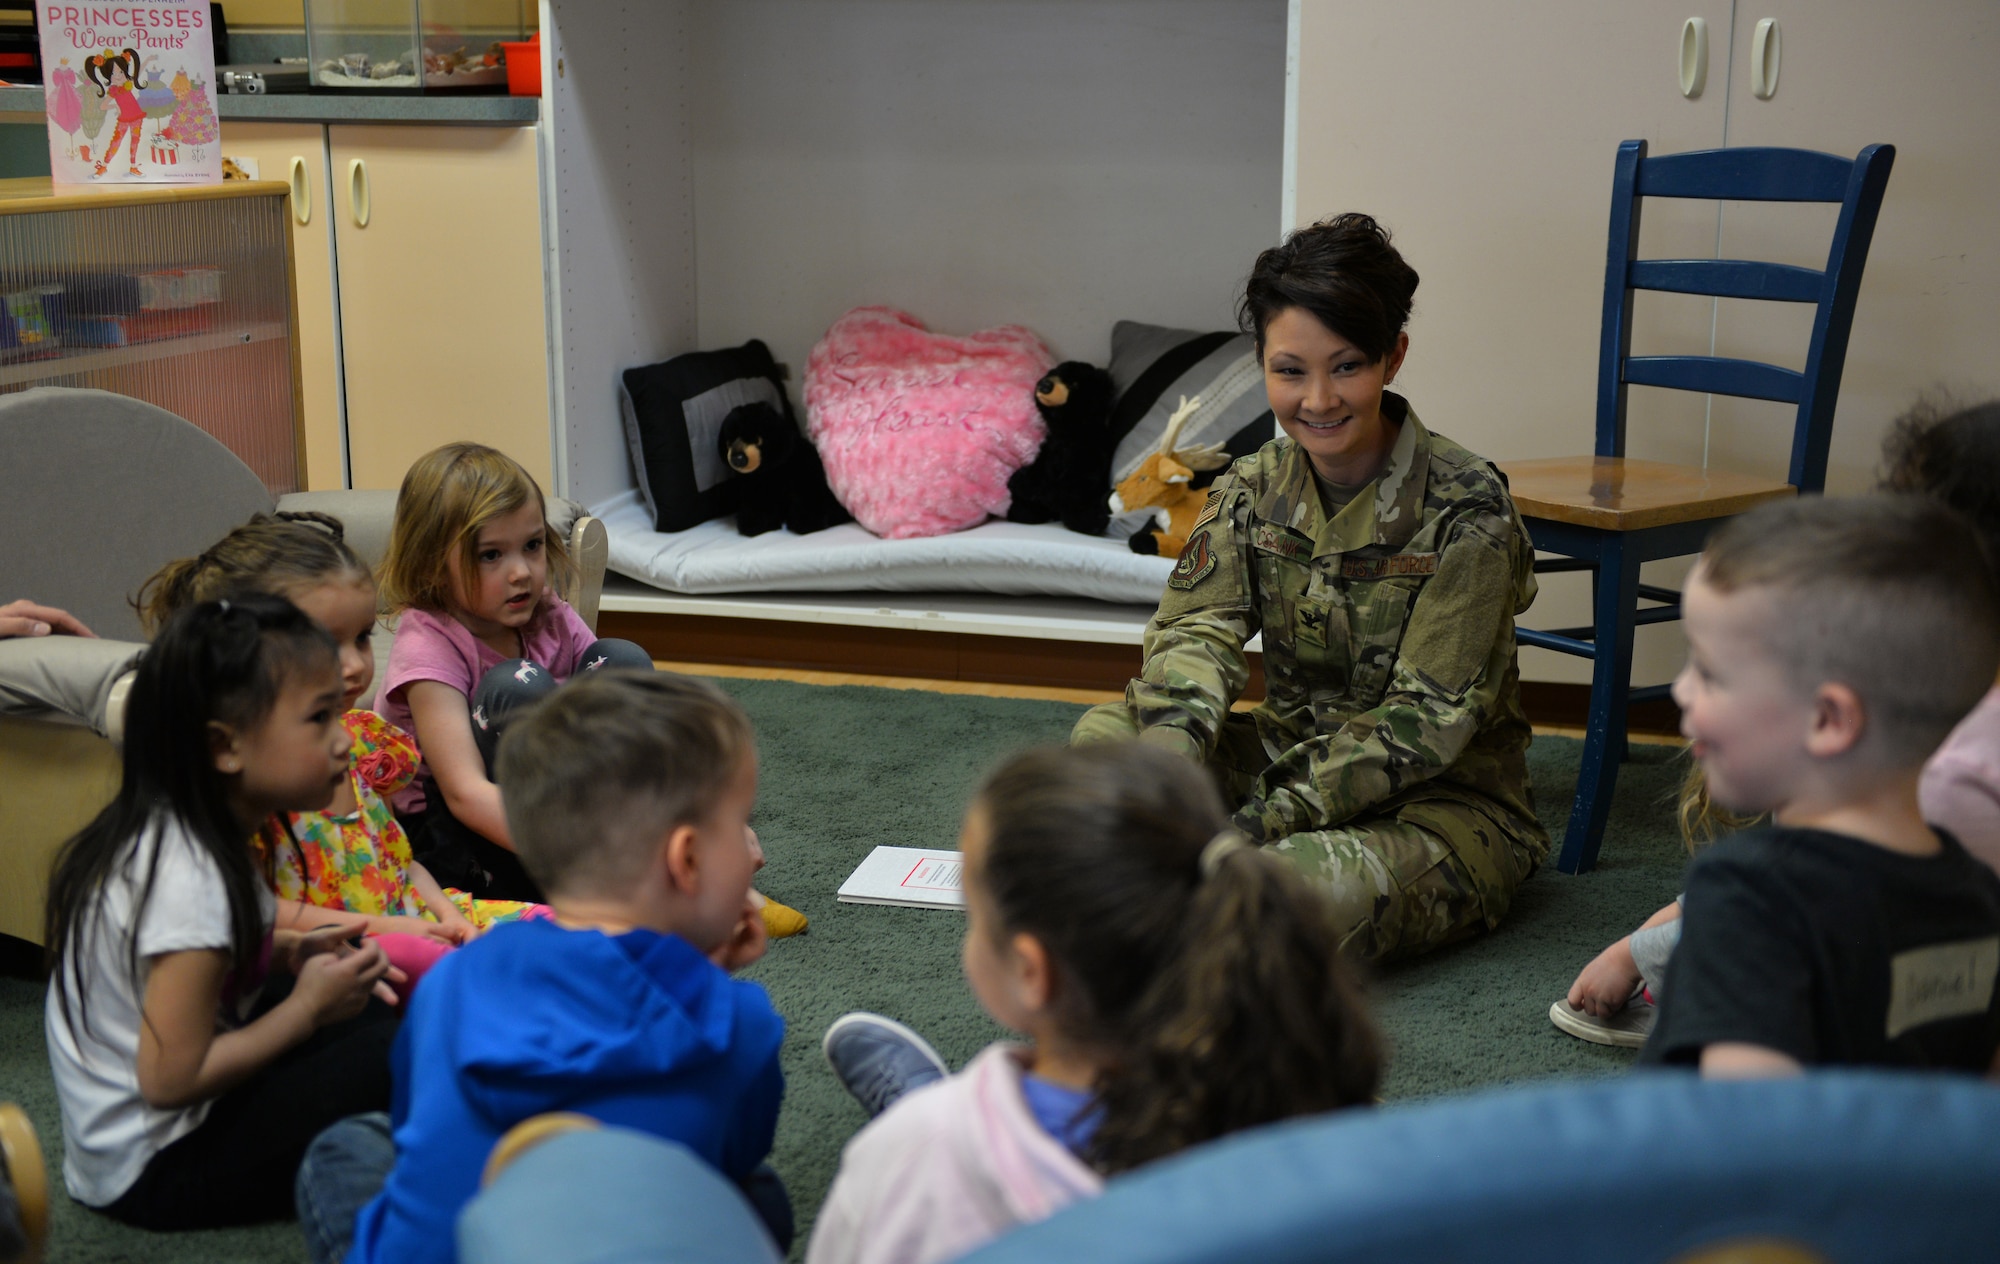 U.S. Air Force Col. Patricia Csànk, Joint Base Elmendorf-Richardson and 673d Air Base Wing commander, interacts with kids at the Denali Child Development Center, JBER, Alaska, April 8, 2019. In honor of Month of the Military Child, Csànk visited the Denali Child Development Center at JBER to read to some of the children. Out the selection of four books, the kids elected to read “The Book With No Pictures,” by B.J. Novak, knowing all too well what this piece of literature would have Csànk reading aloud.